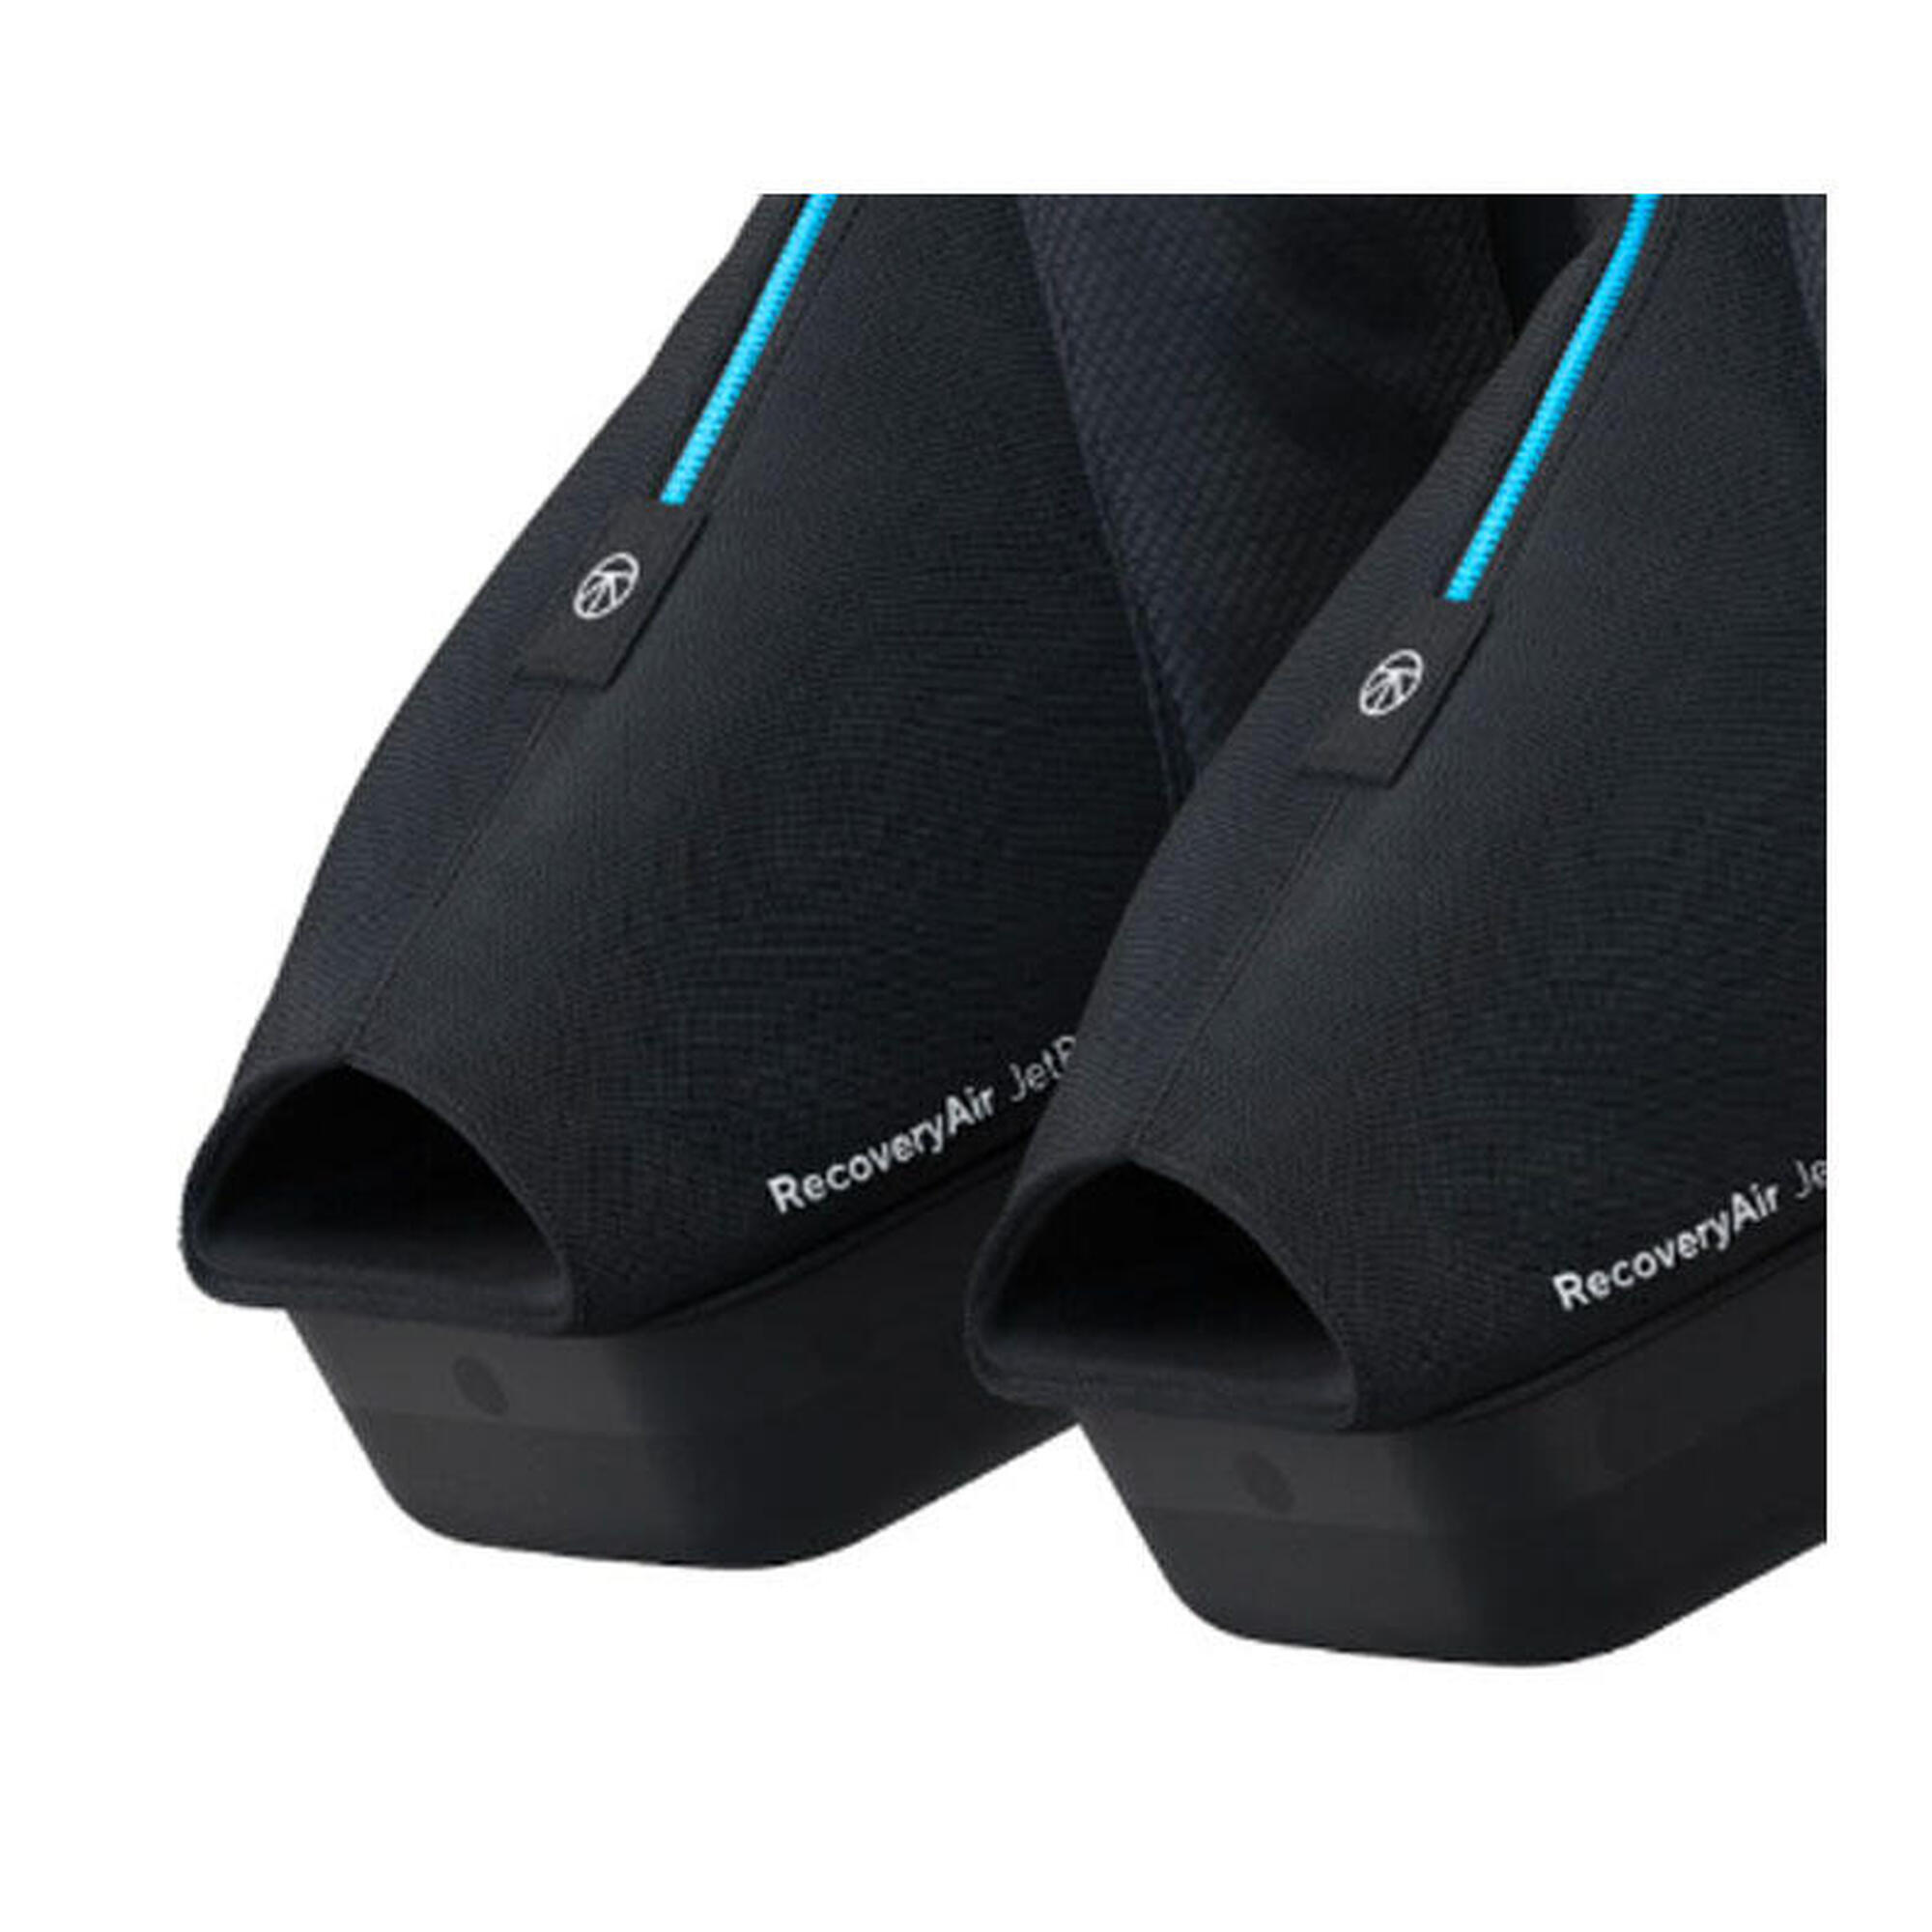 Wireless Boots a compressione Therabody RecoveryAir JetBoots - S